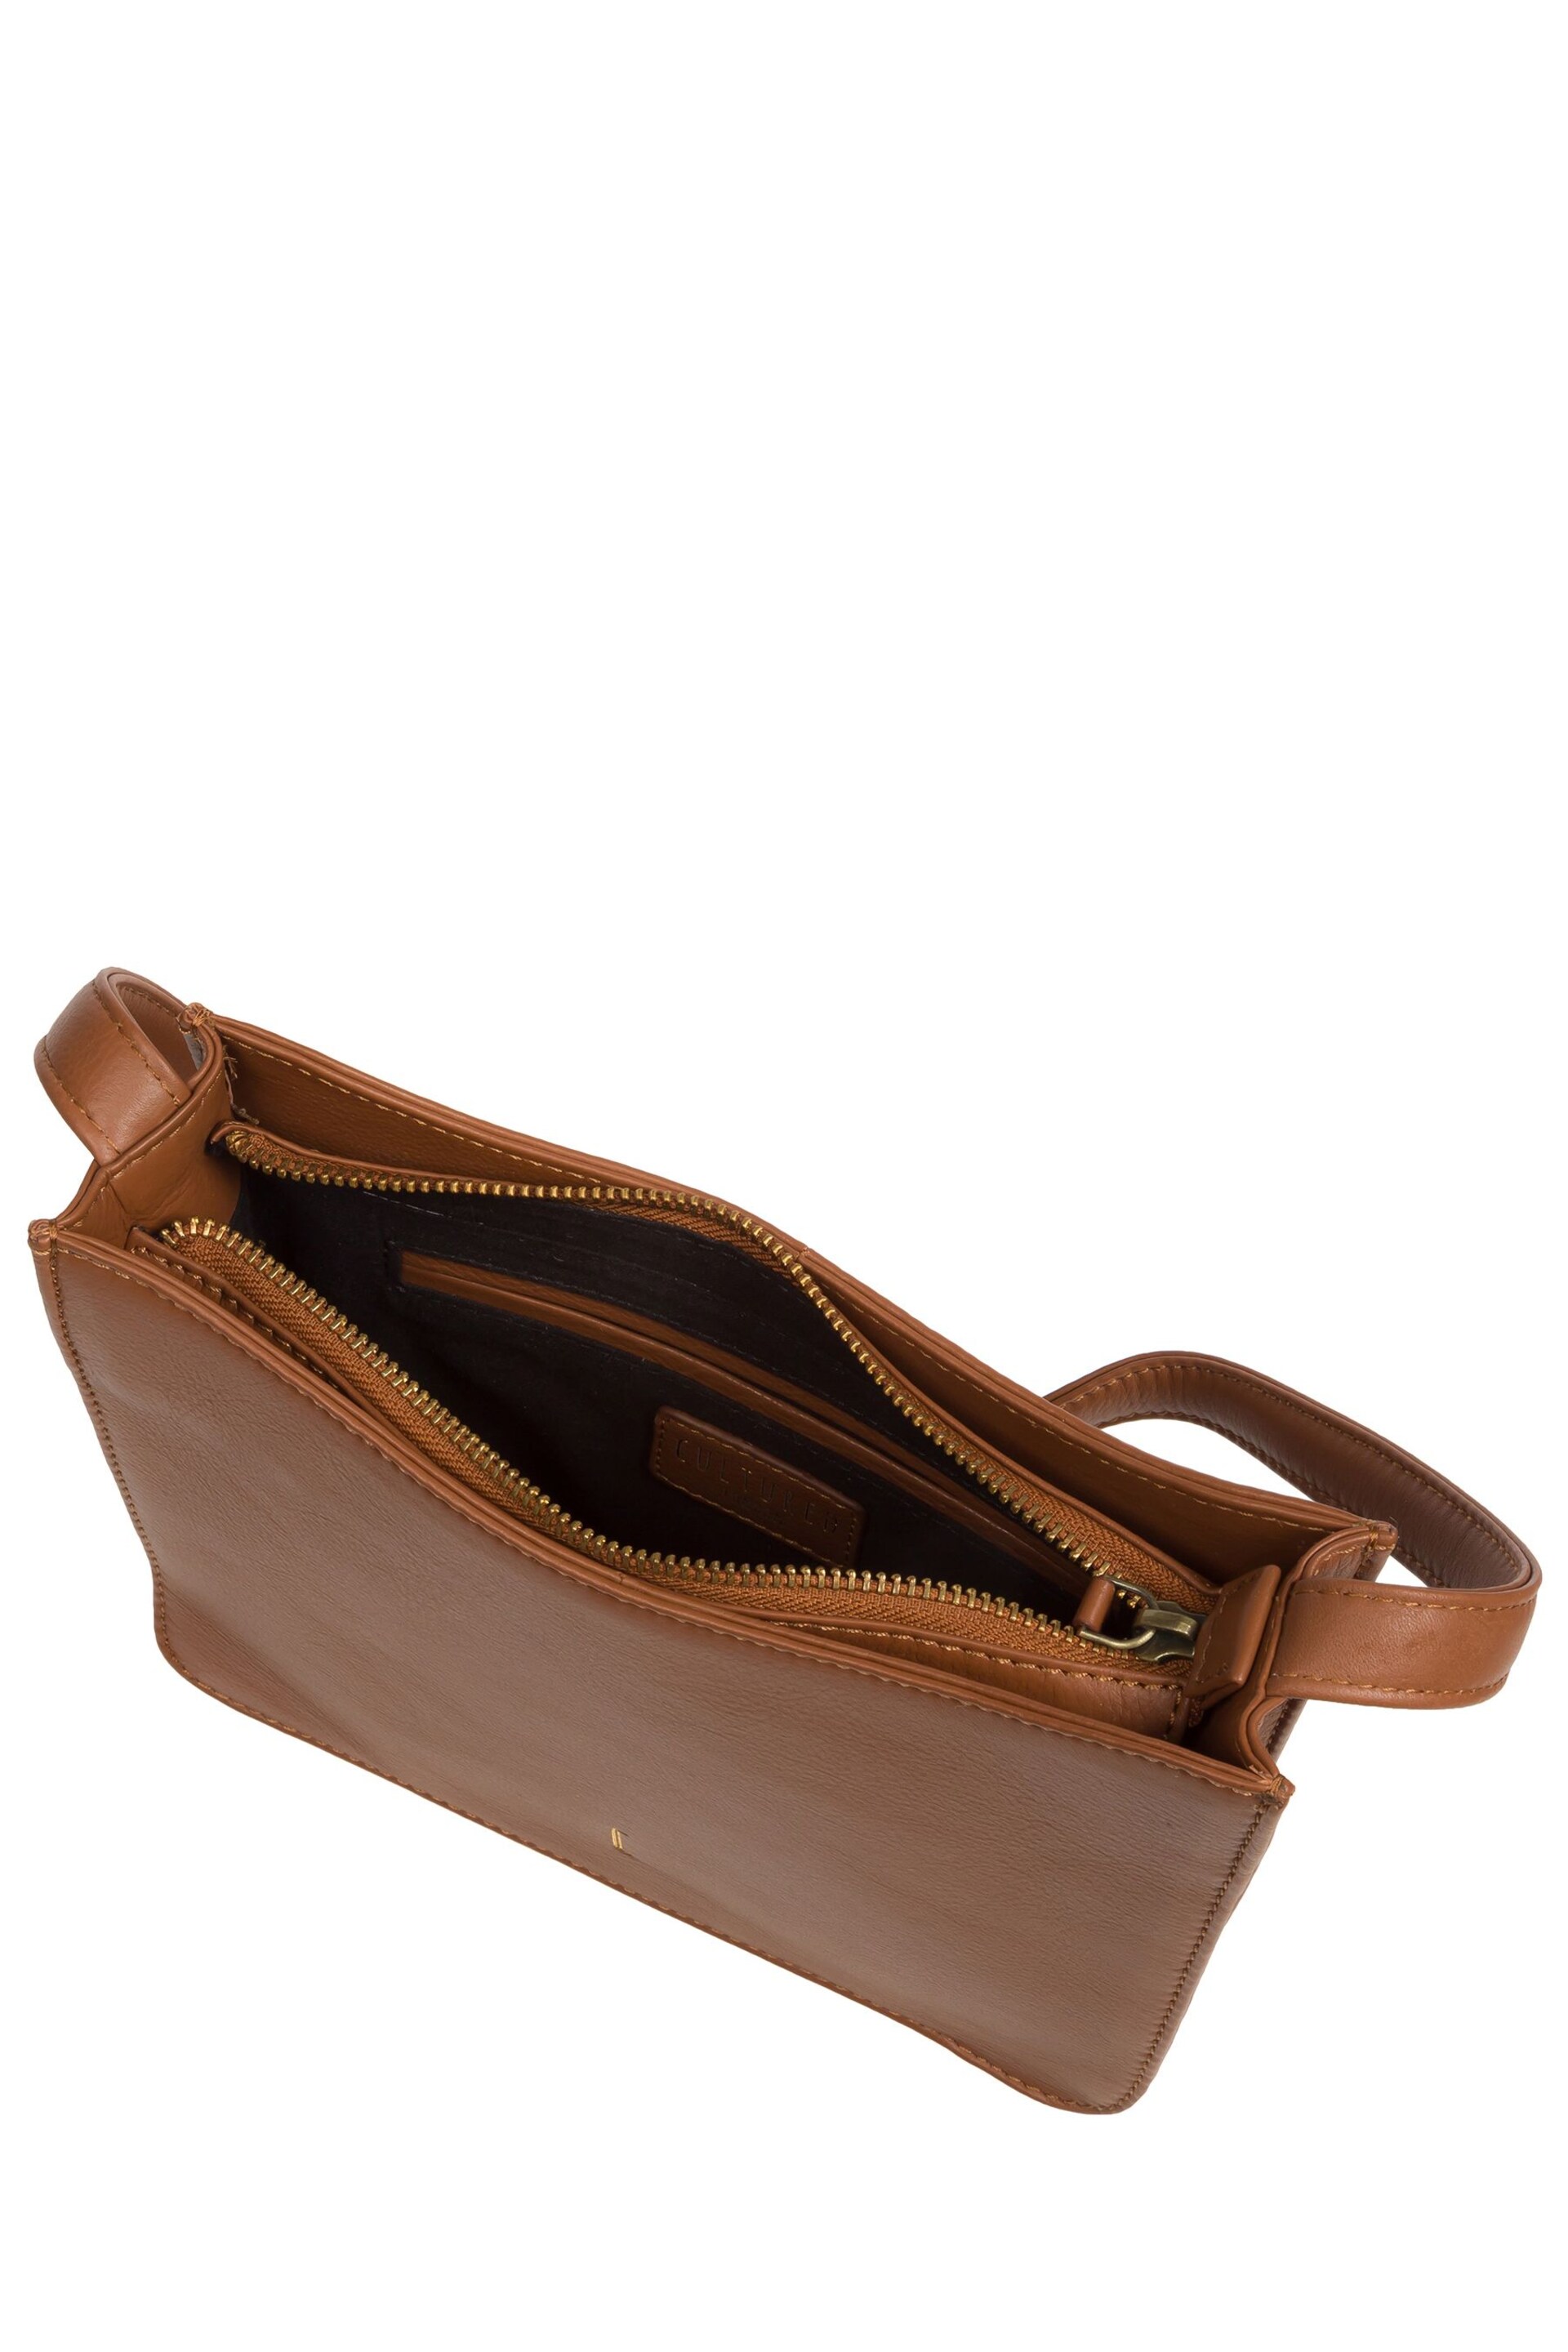 Cultured London Ava Leather Grab Bag - Image 4 of 5